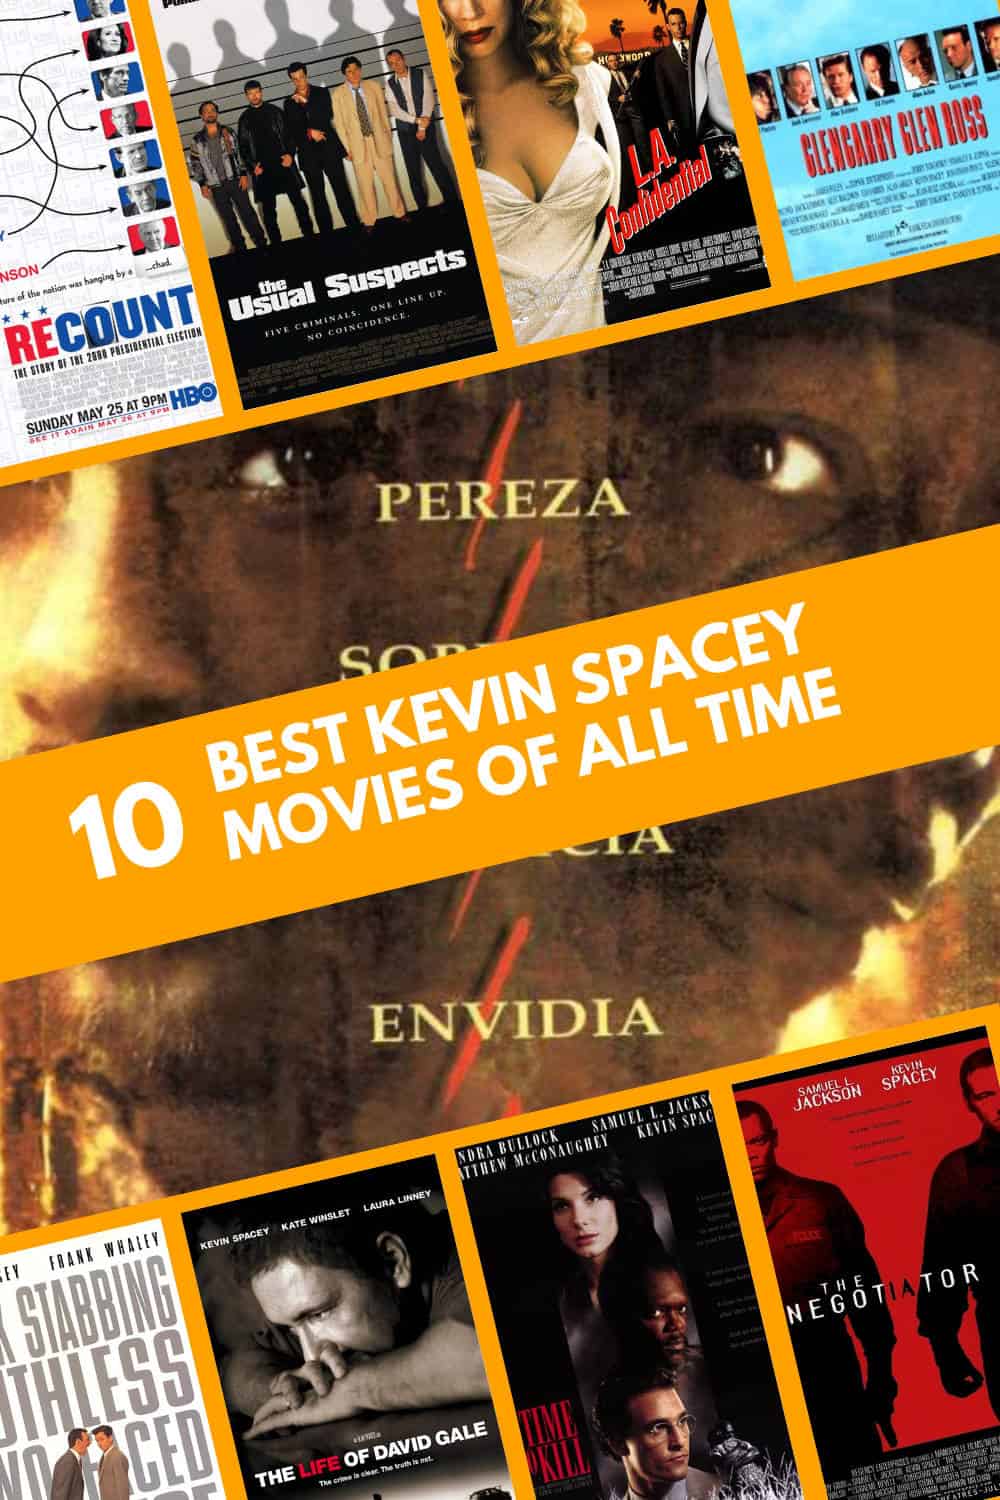 Kevin Spacey Movies of All Time